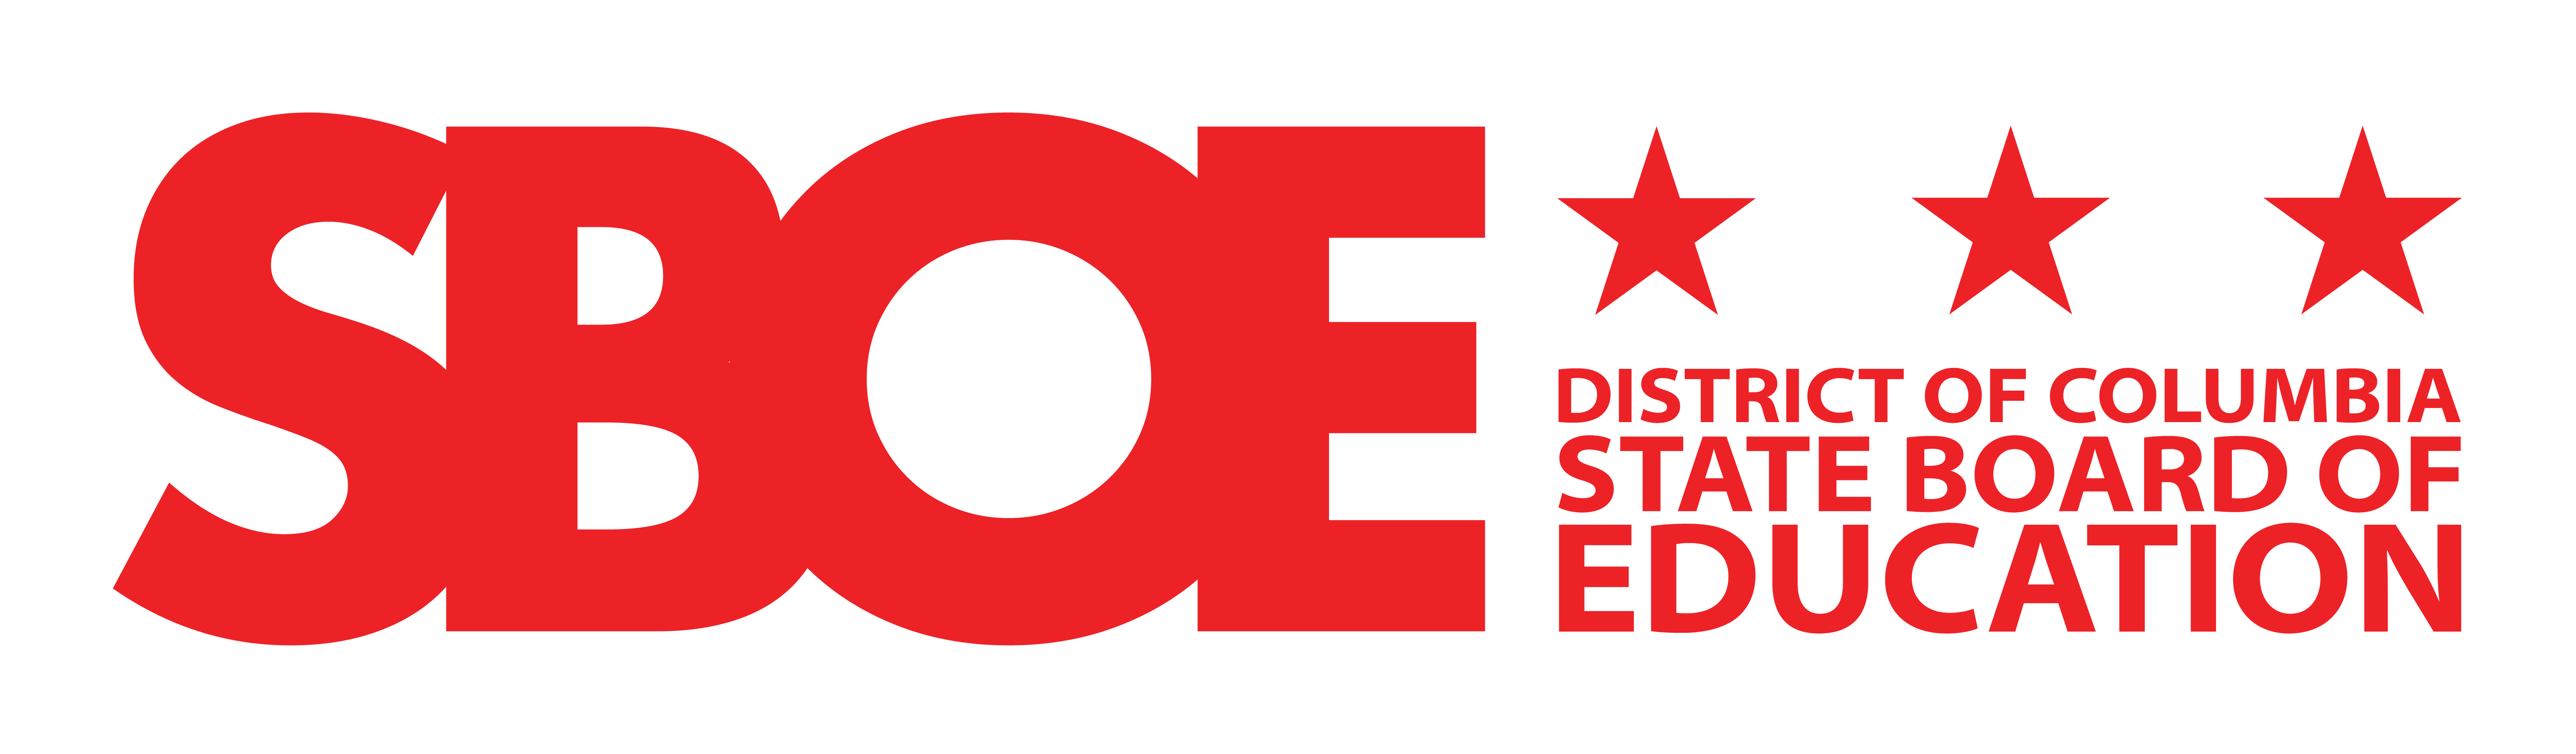 Logo for the State Board of Education